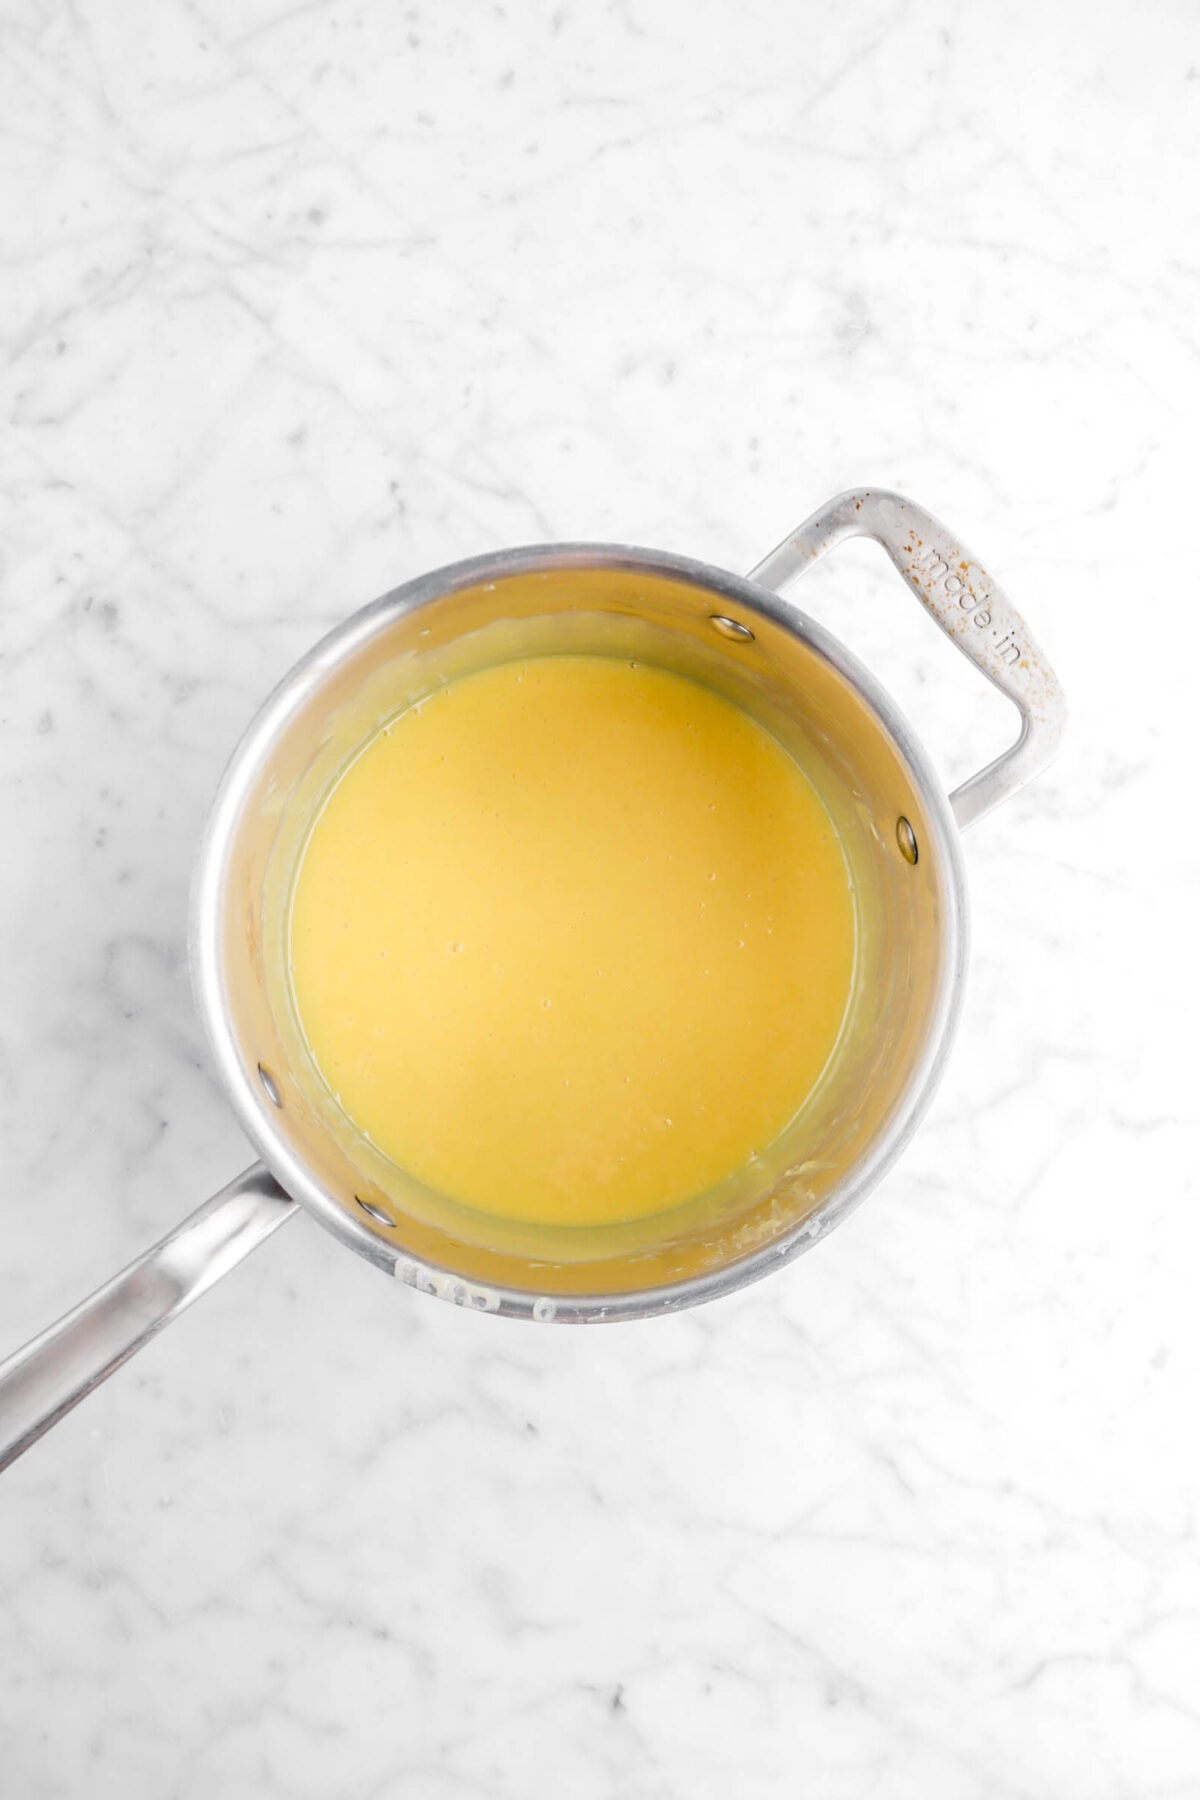 condensed milk and yolk mixture in large pot on marble surface